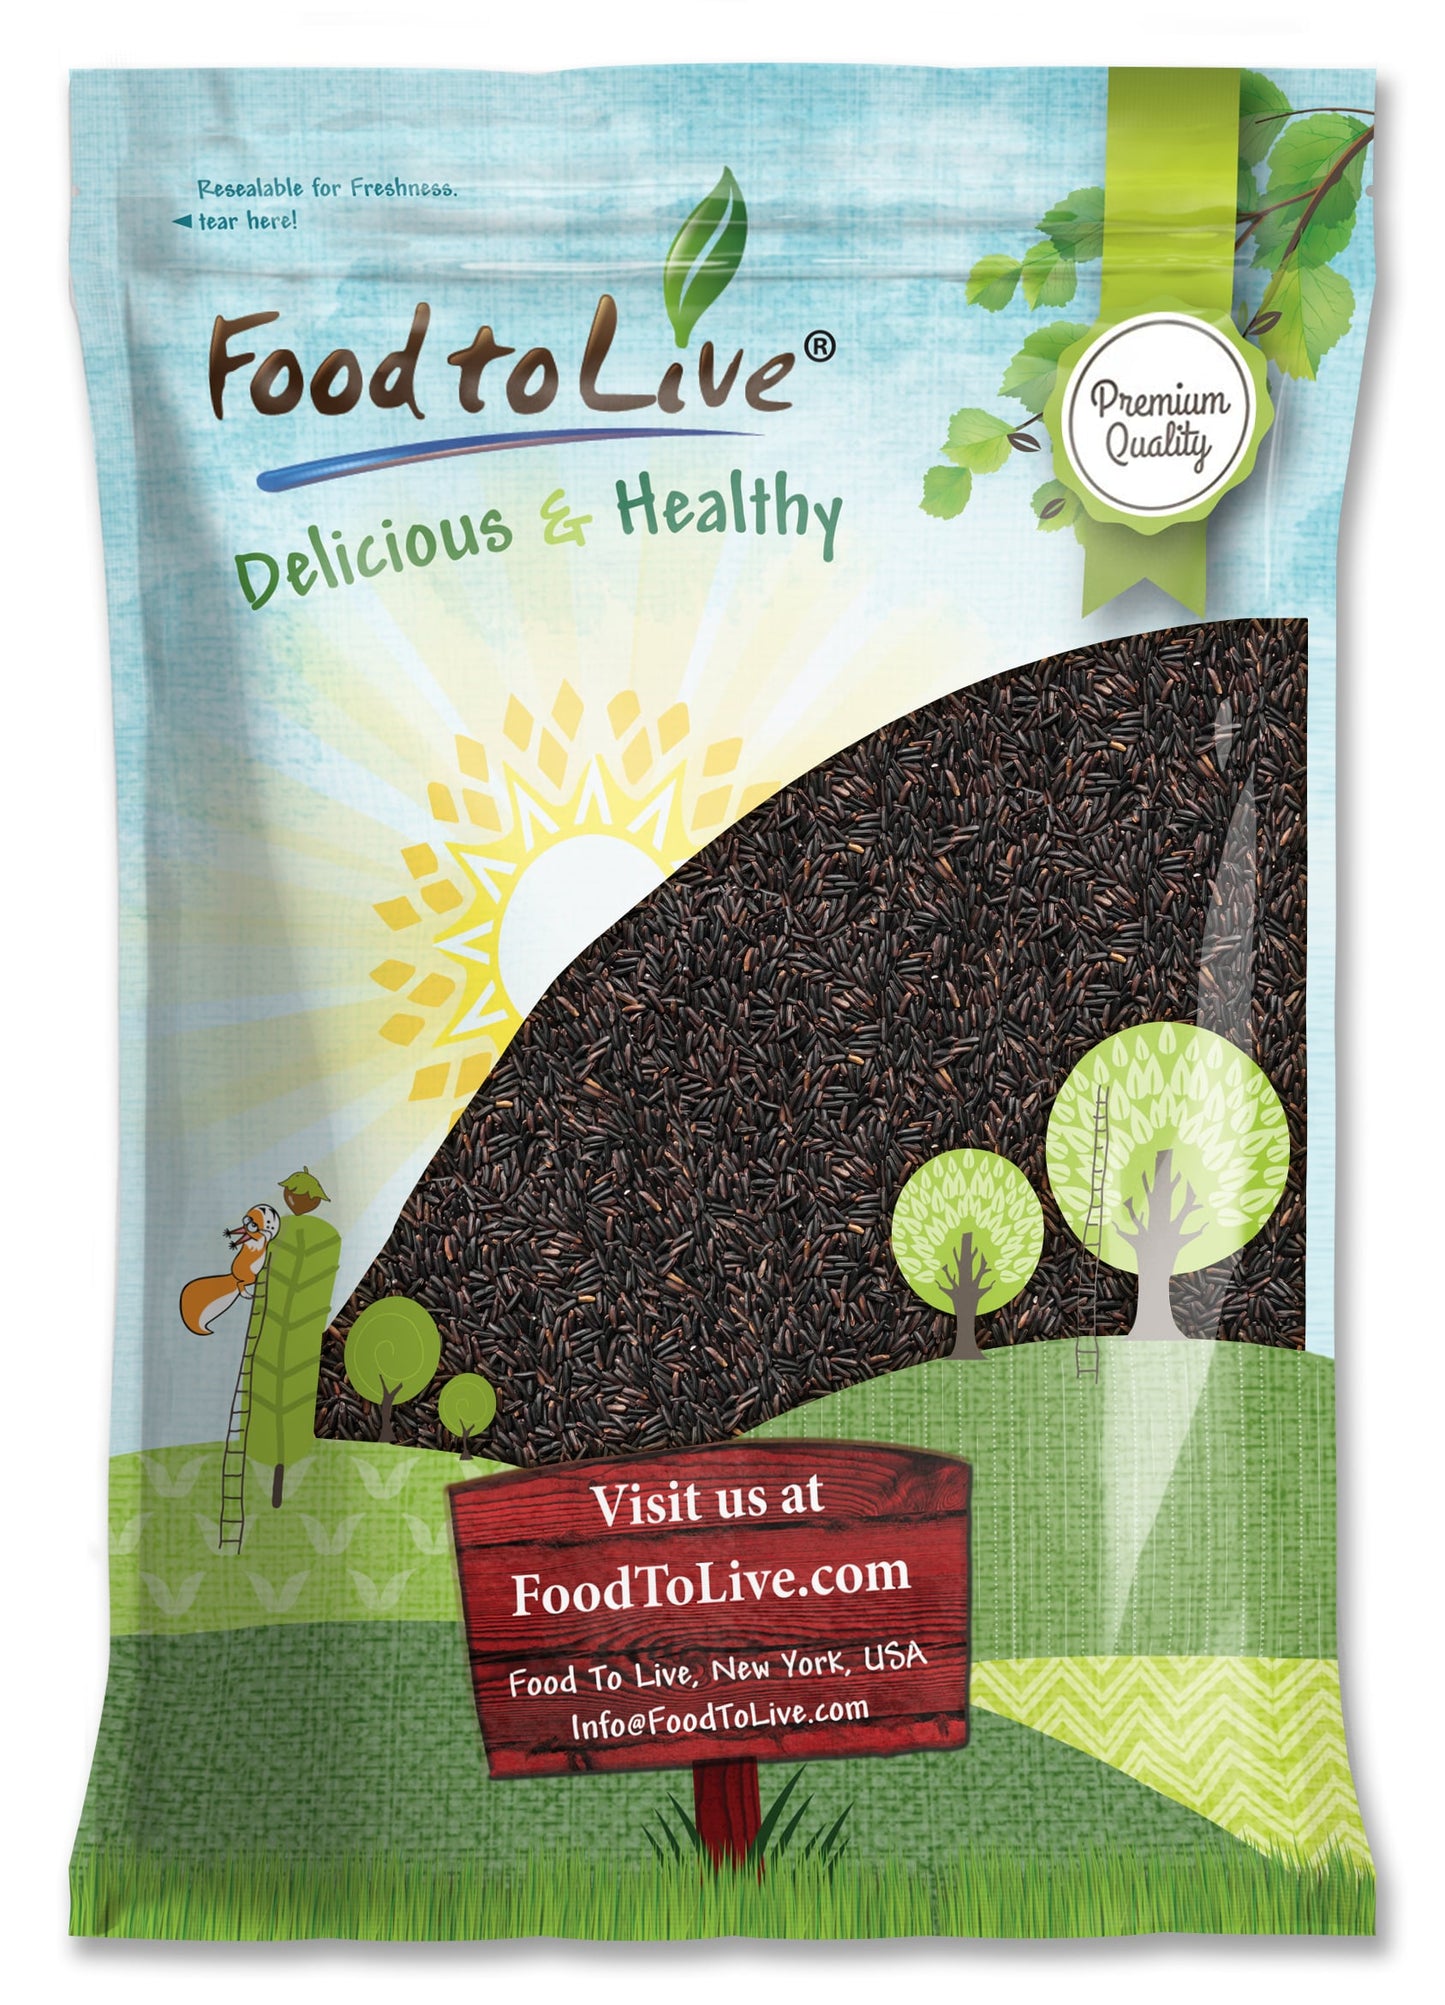 Black Rice — Whole Grain Rice, Medium-Grain Rice, Kosher, Vegan, Bulk. Nutty, and Sweet Flavor. Rich in Antioxidants and Dietary Fiber. Great for Stir-Fries, Salads, and Pudding